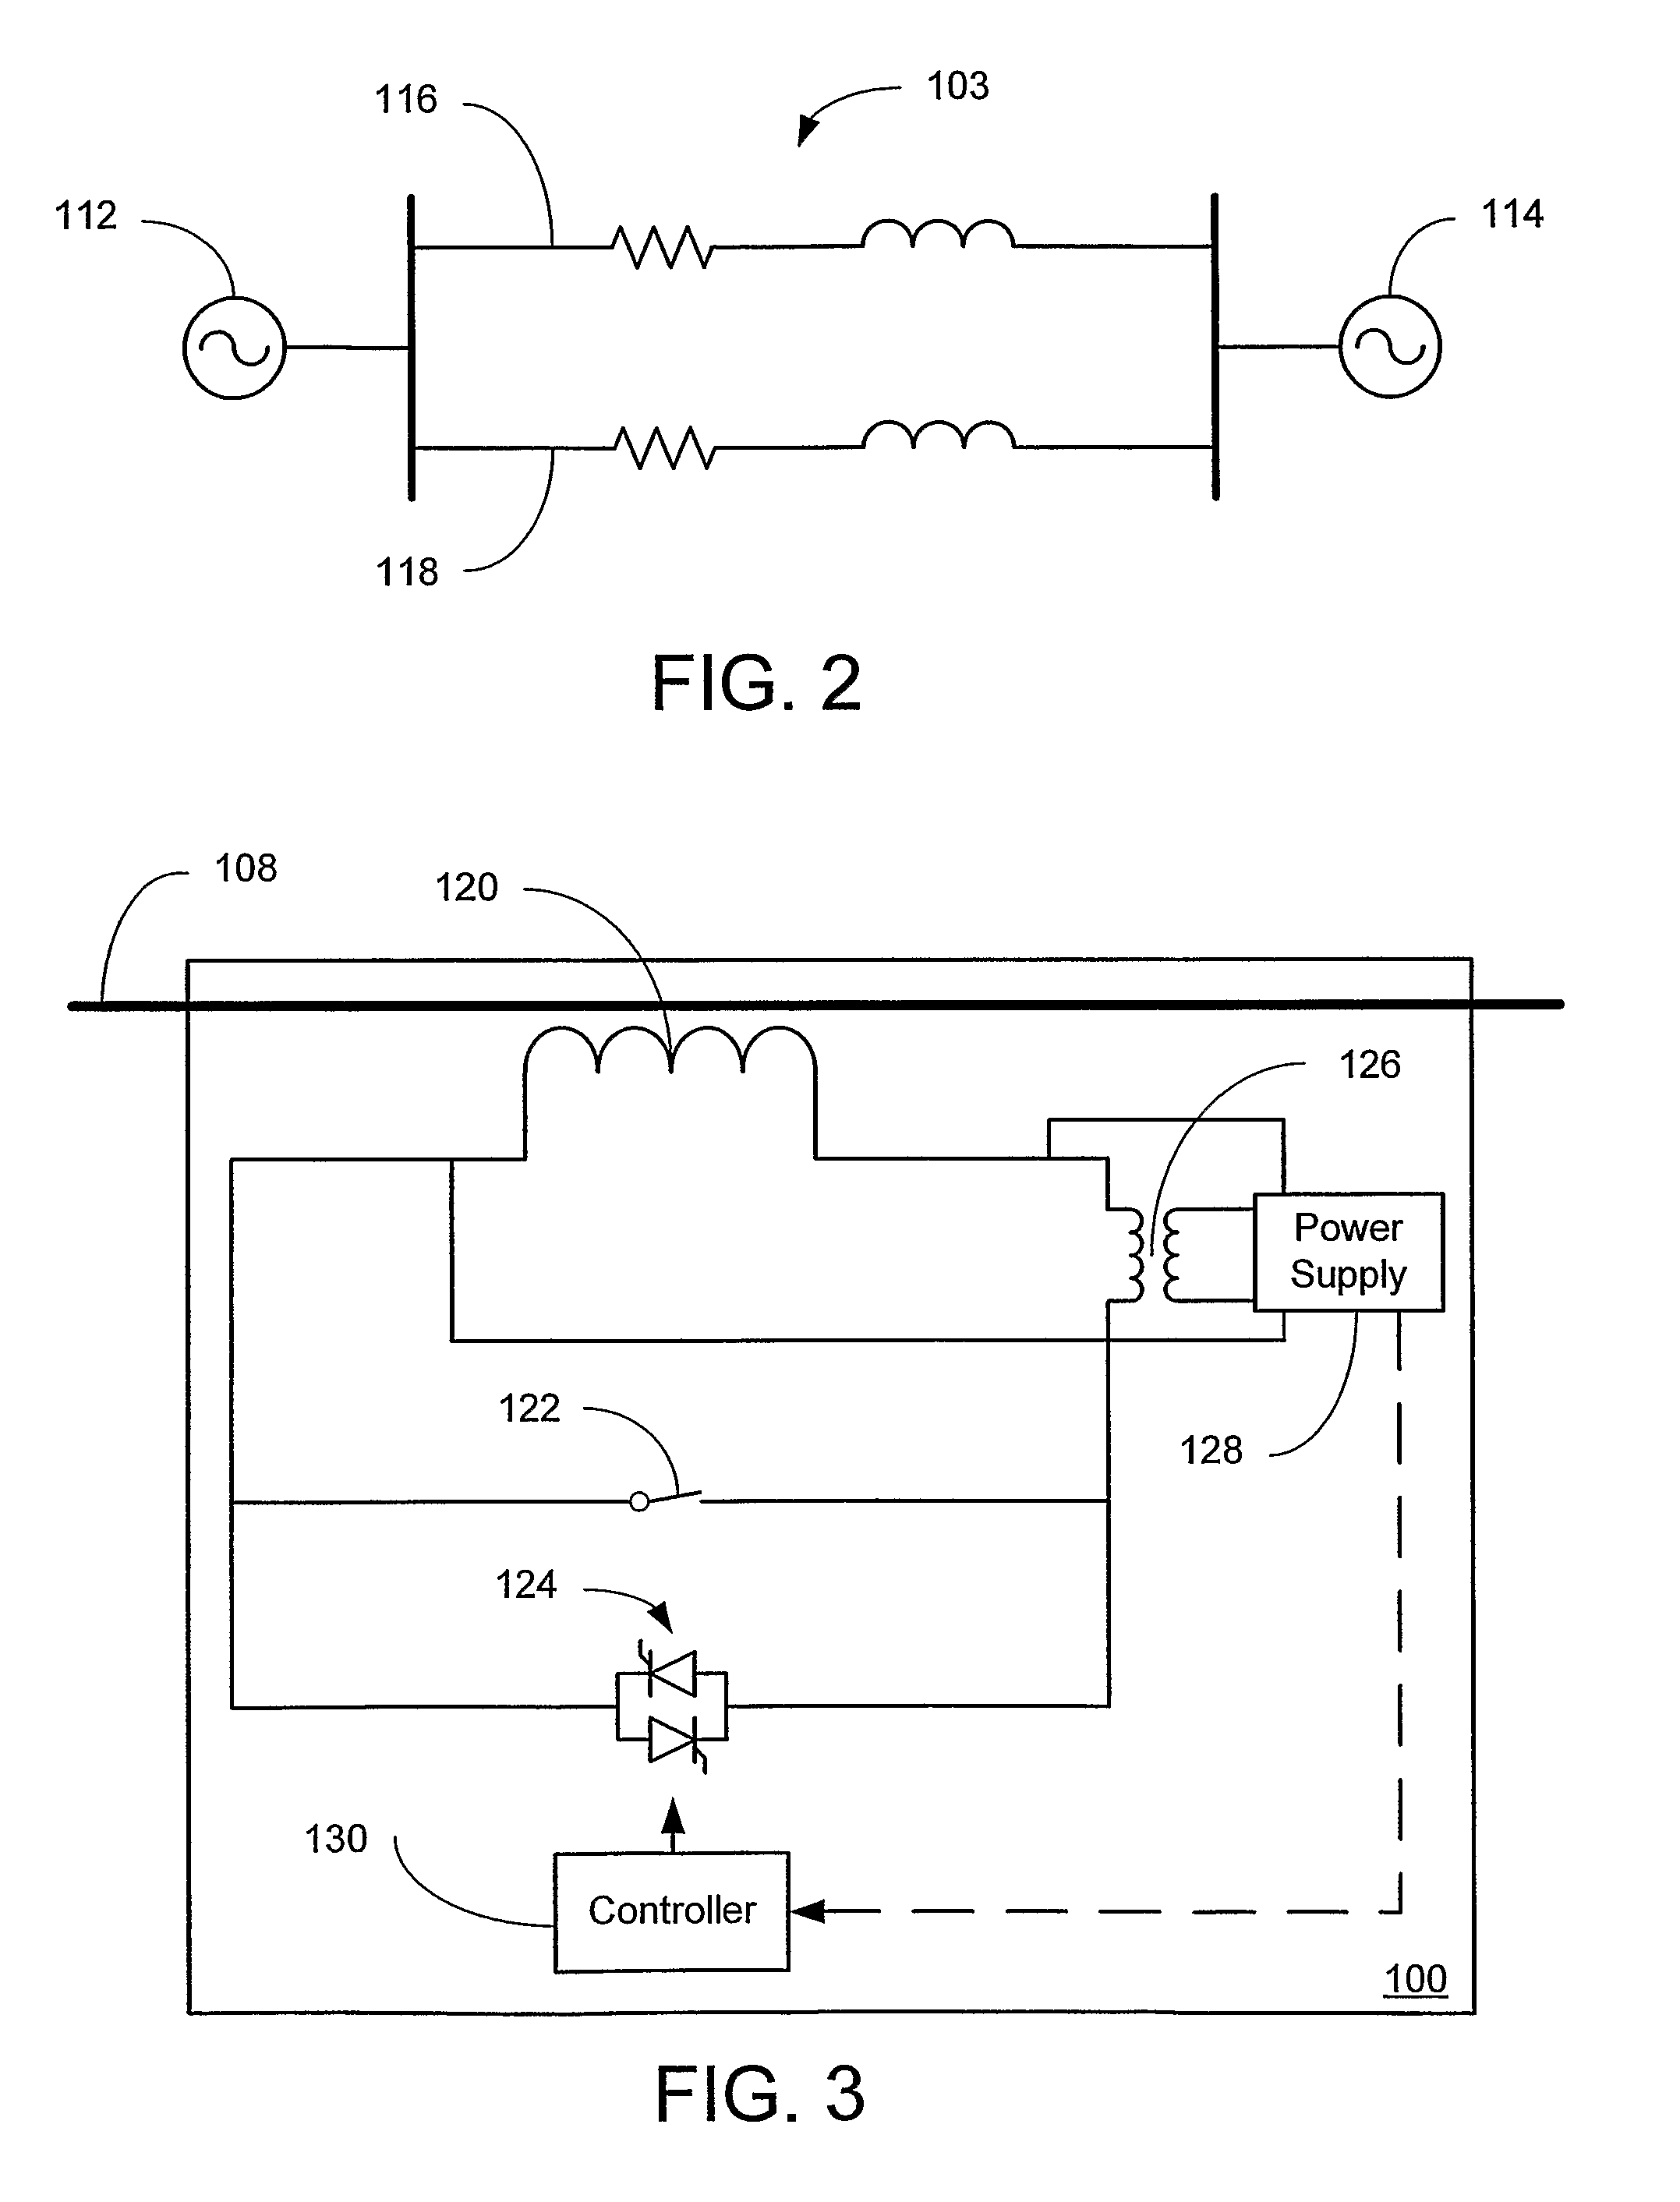 Systems and methods for distributed series compensation of power lines using passive devices